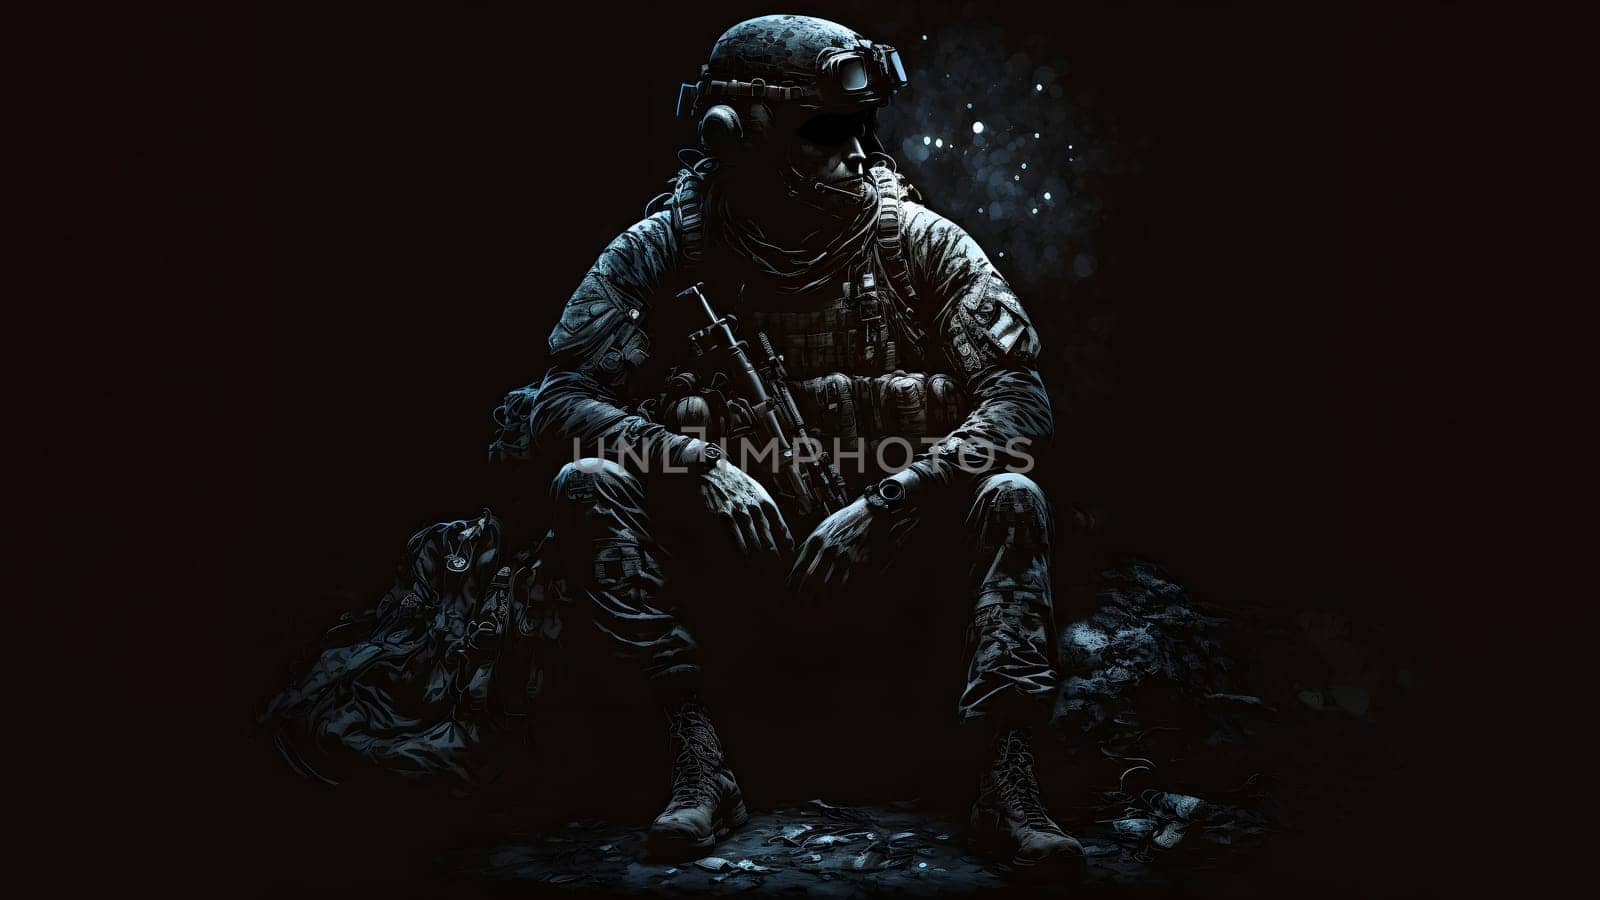 soldier in camouflaged uniform, helmet and gloves sitting on dark background with dramatic light, neural network generated art. Not based on any actual person, scene or pattern.